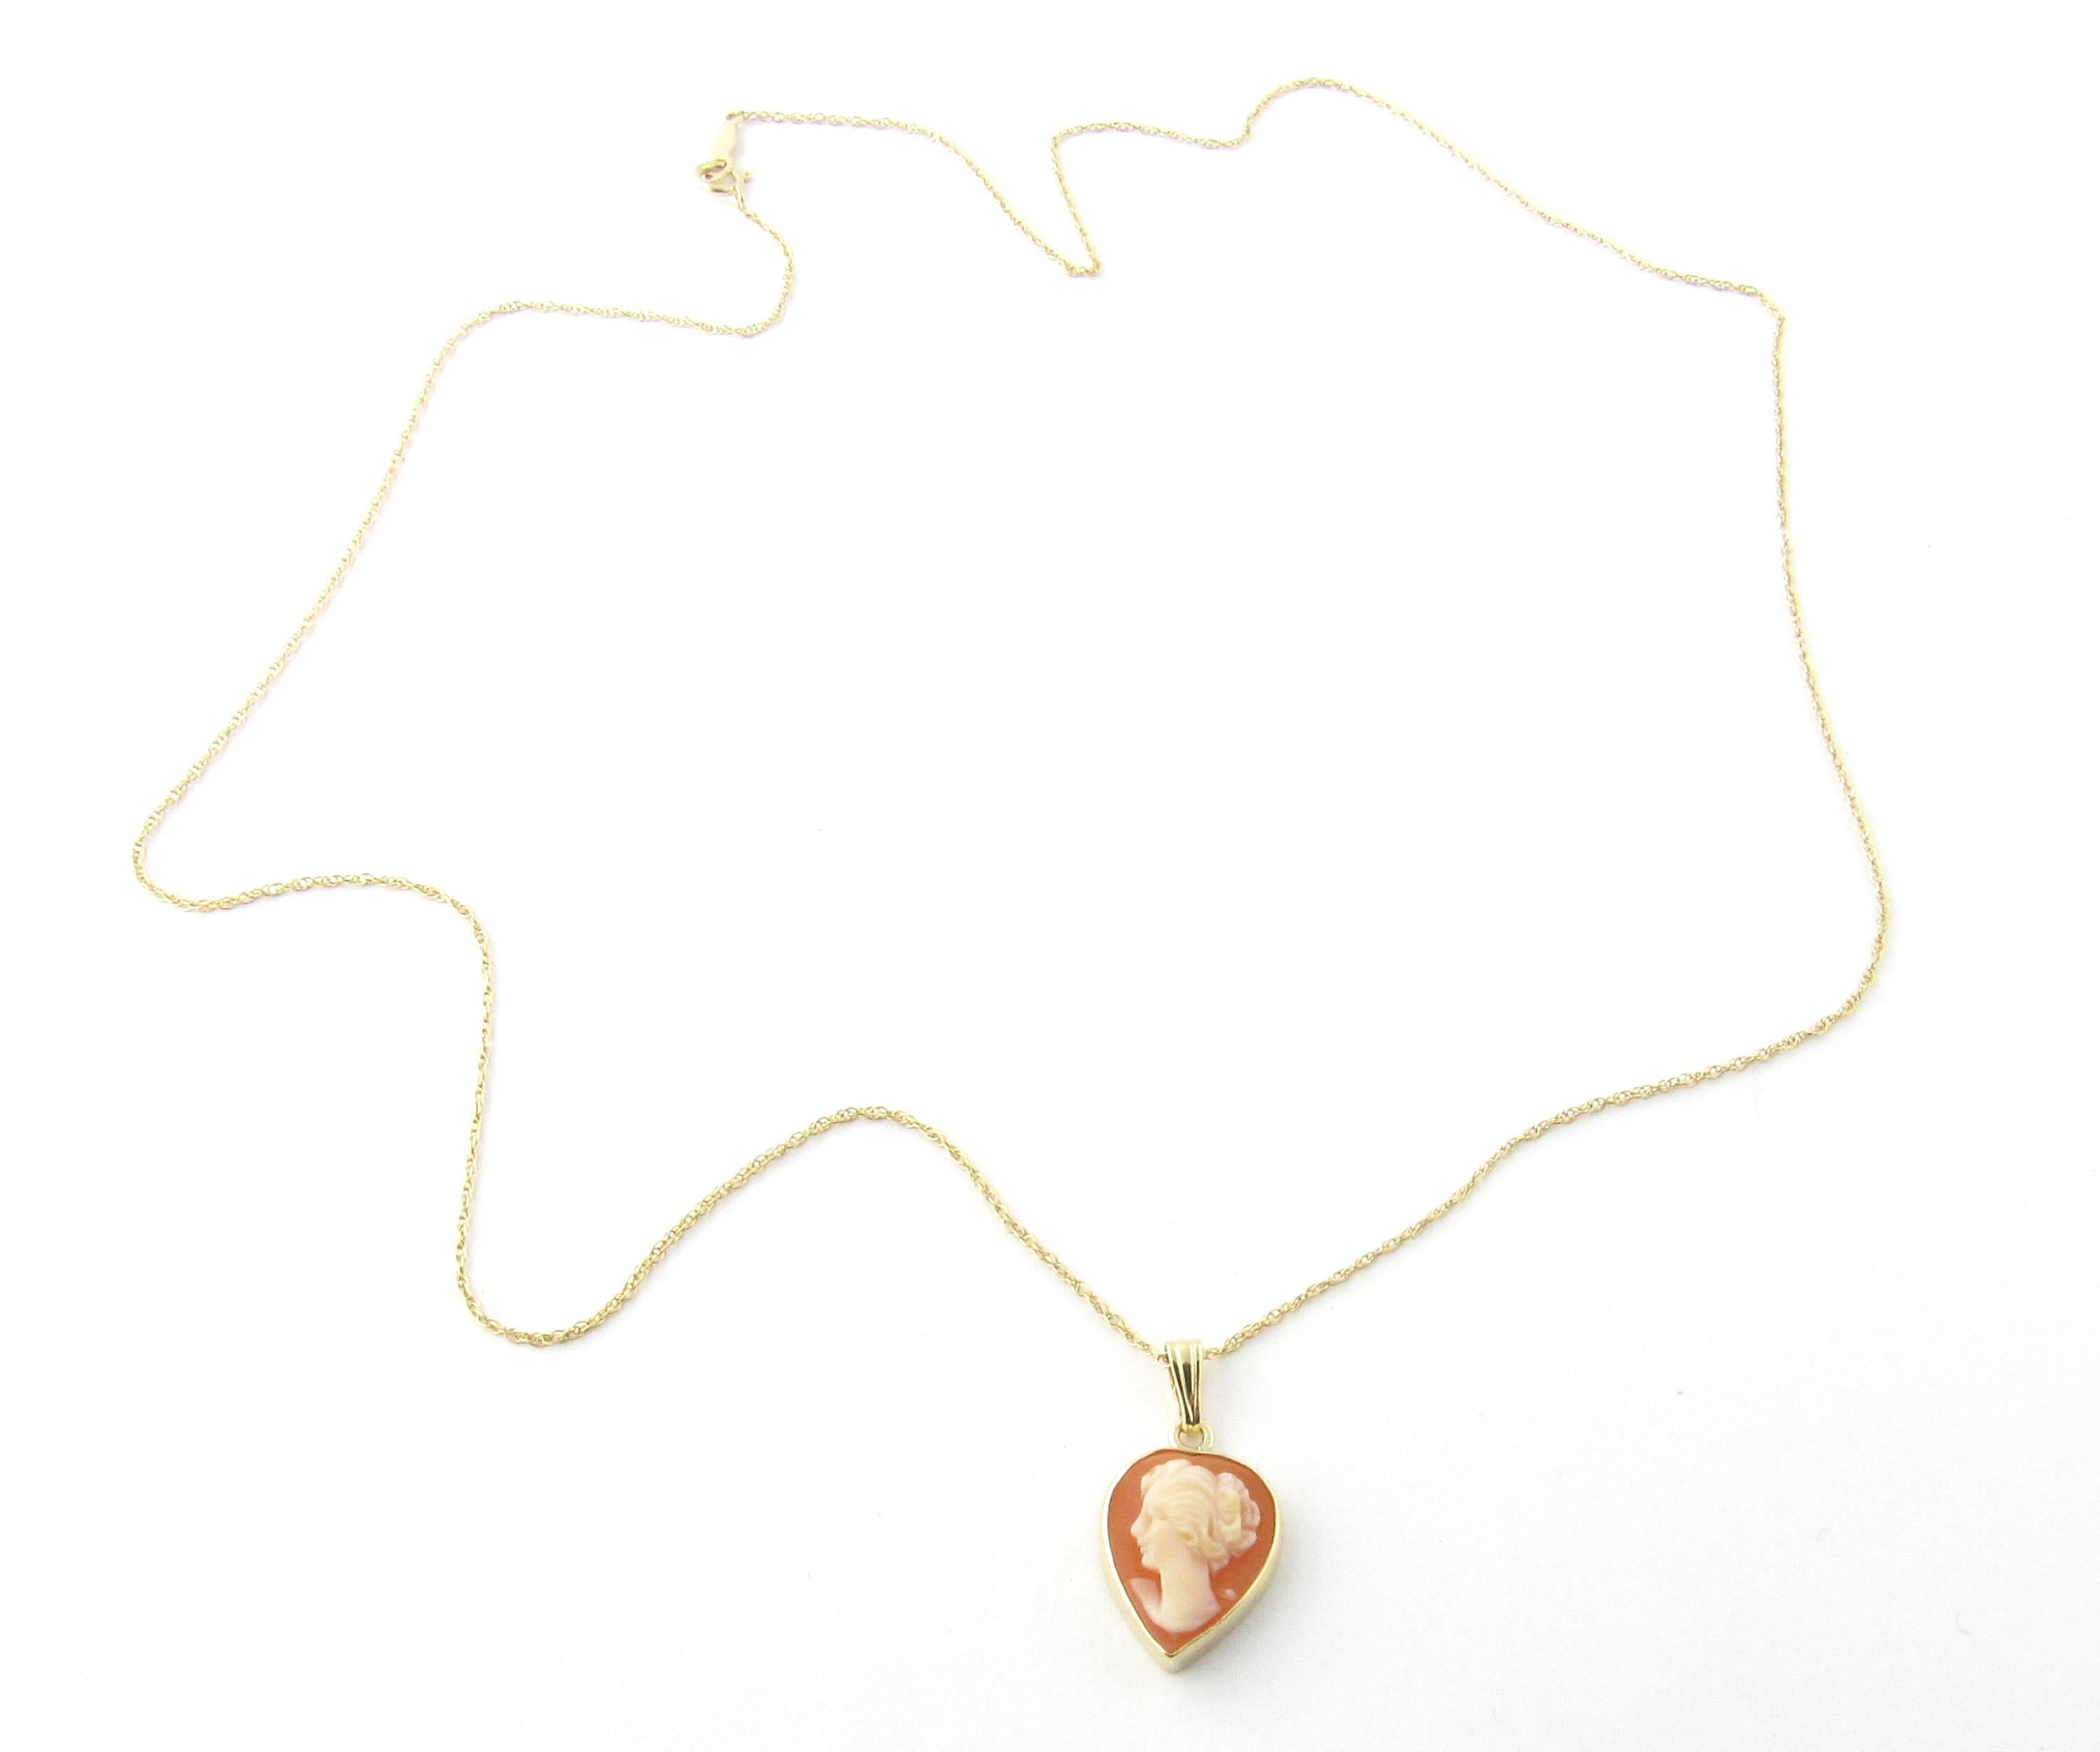 Vintage 14 Karat Yellow Gold Cameo Heart Pendant Necklace-

This lovely heart cameo pendant features a lovely lady in profile framed in polished 14K yellow gold. Hangs from a delicate 14K yellow gold necklace.

Size: Pendant - 13 mm x 11 mm Necklace